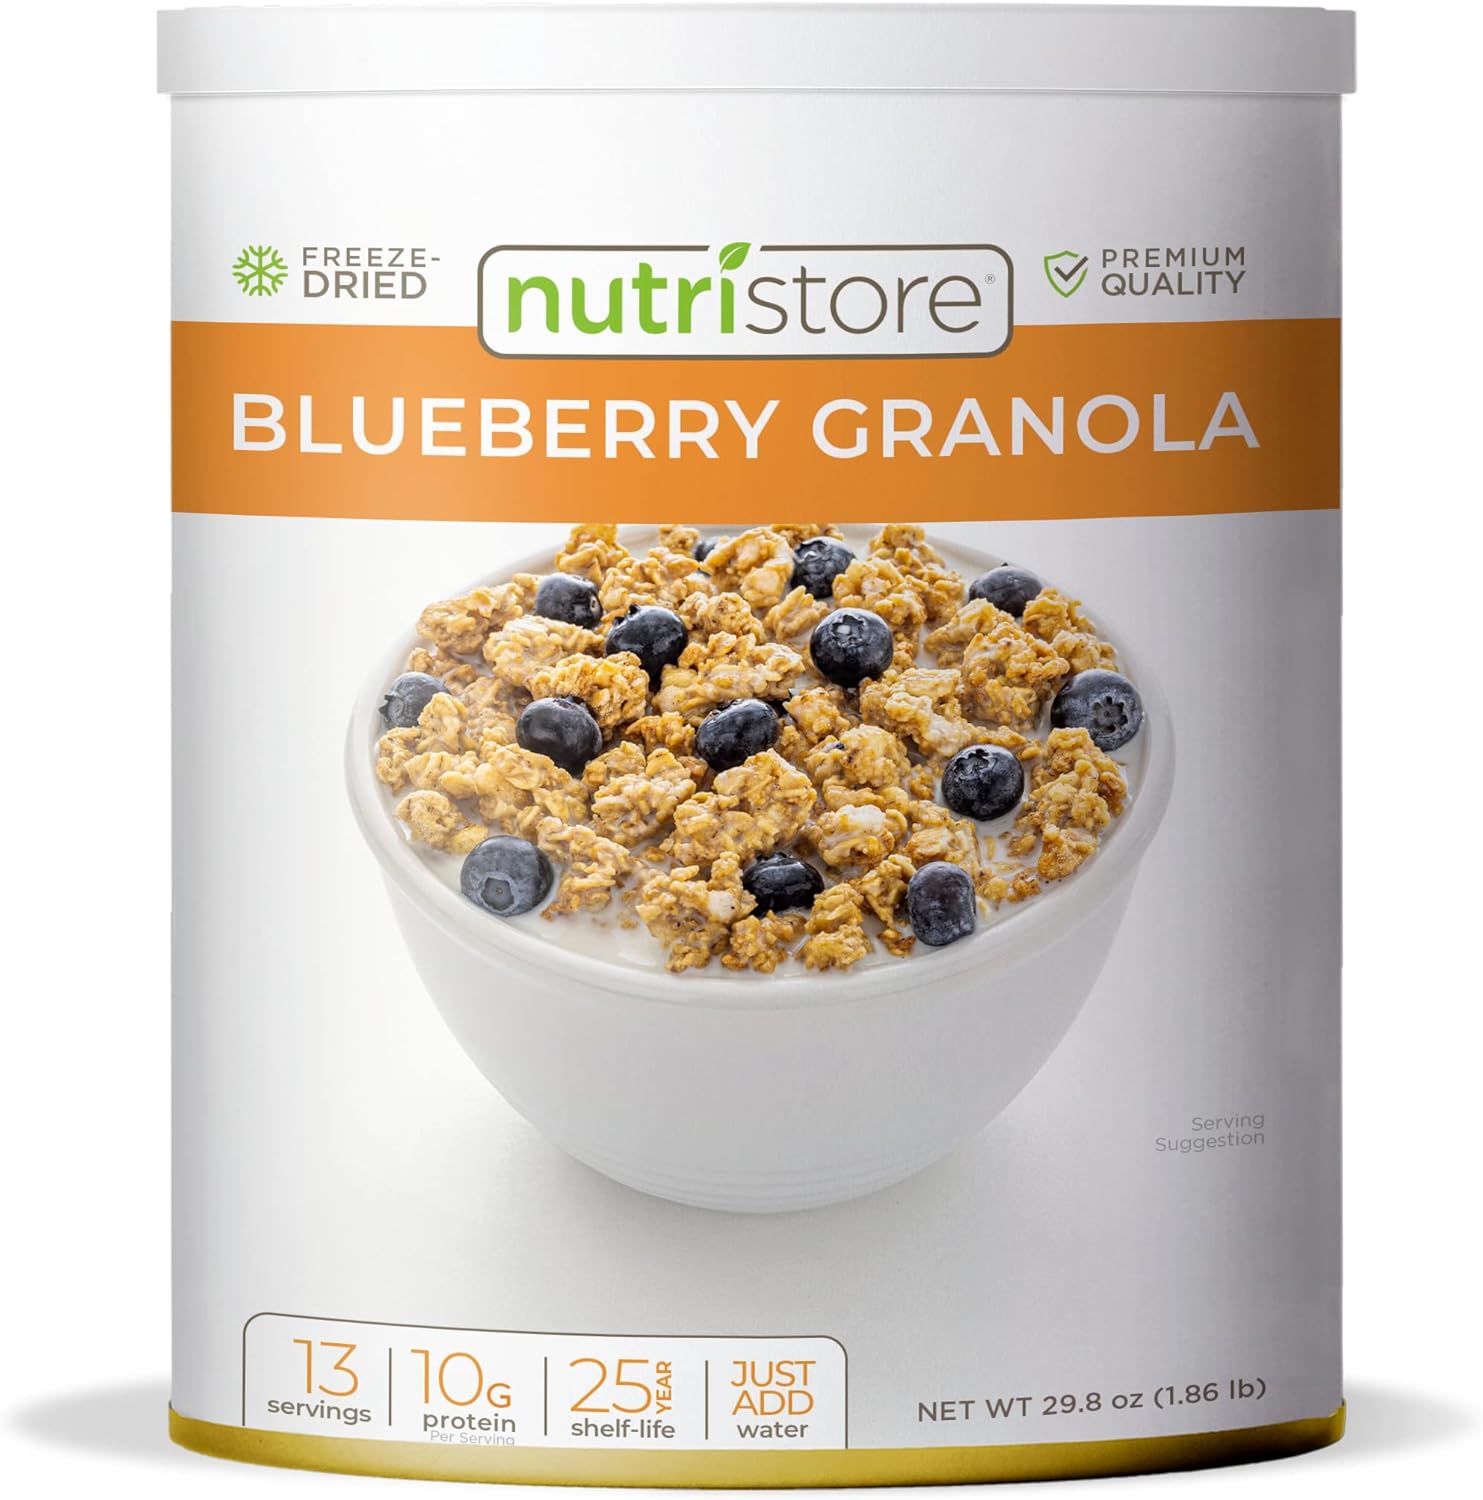 Nutristore | Freeze-Dried Blueberry Granola | Emergency Survival Bulk Food Storage Meal | Perfect for Everyday Quick Meals and Long-Term Storage | 25 Year Shelf Life | USDA Inspected